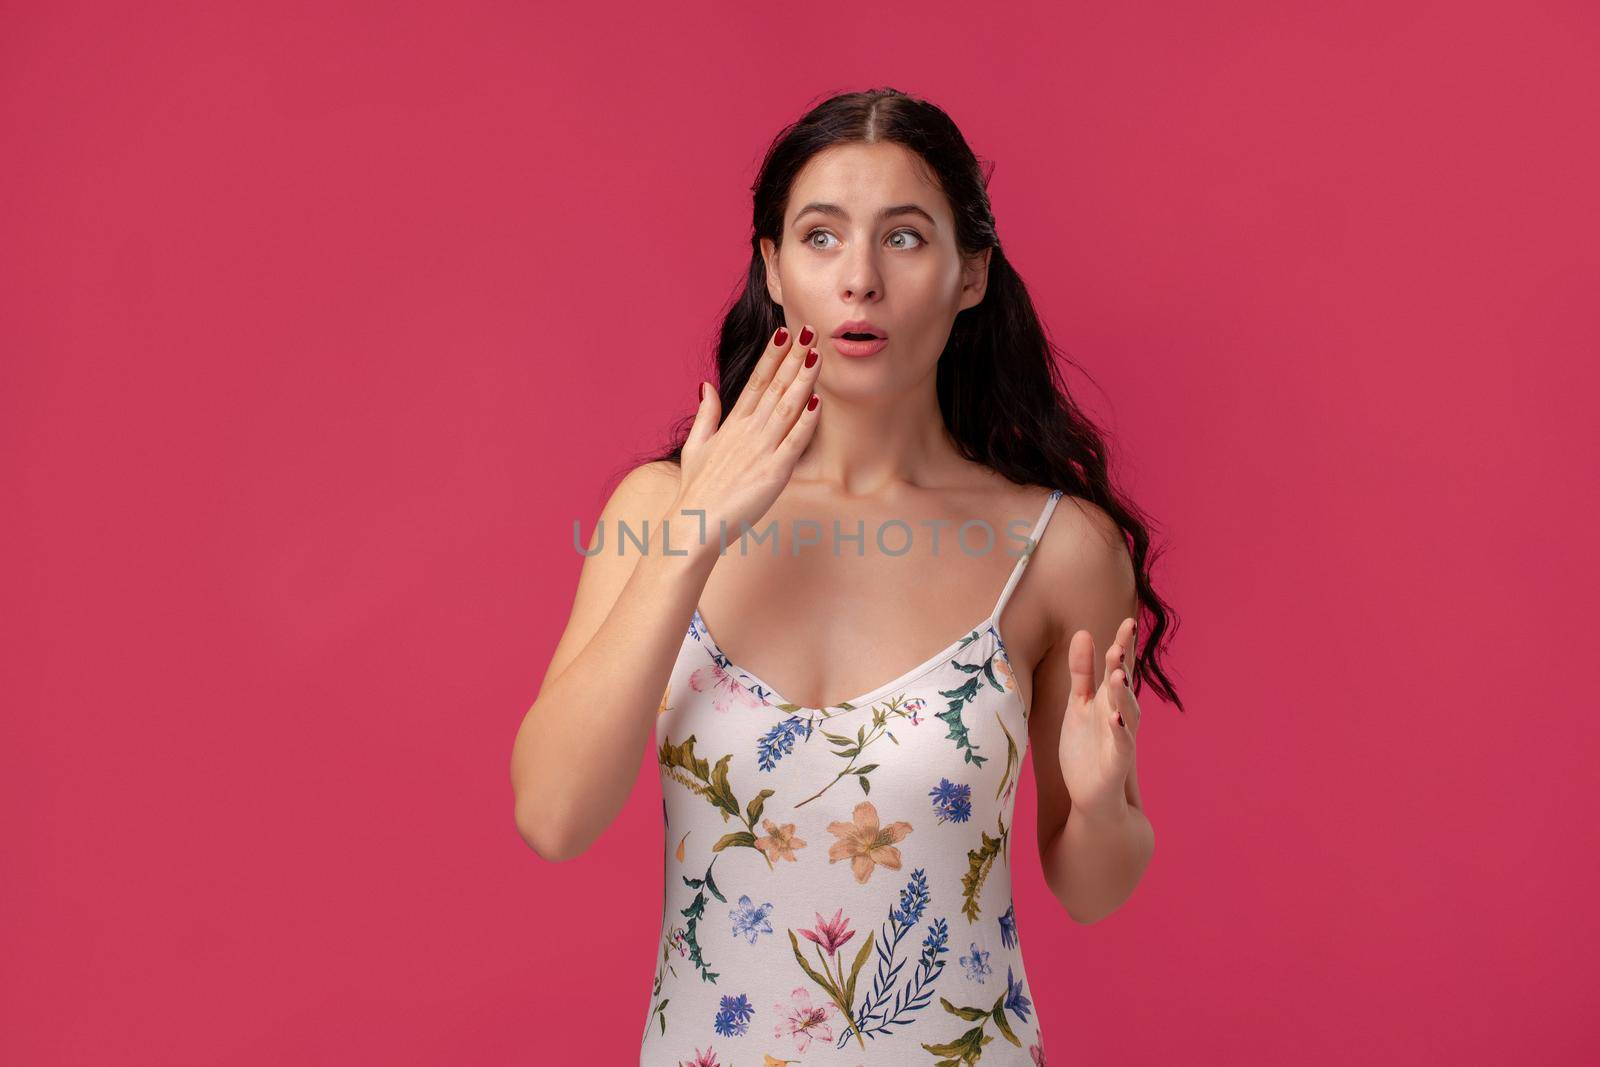 Portrait of a beautiful girl in a white dress with floral print standing on a pink wall background in studio. She is wondered and looking at someone. People sincere emotions, lifestyle concept. Mockup copy space.